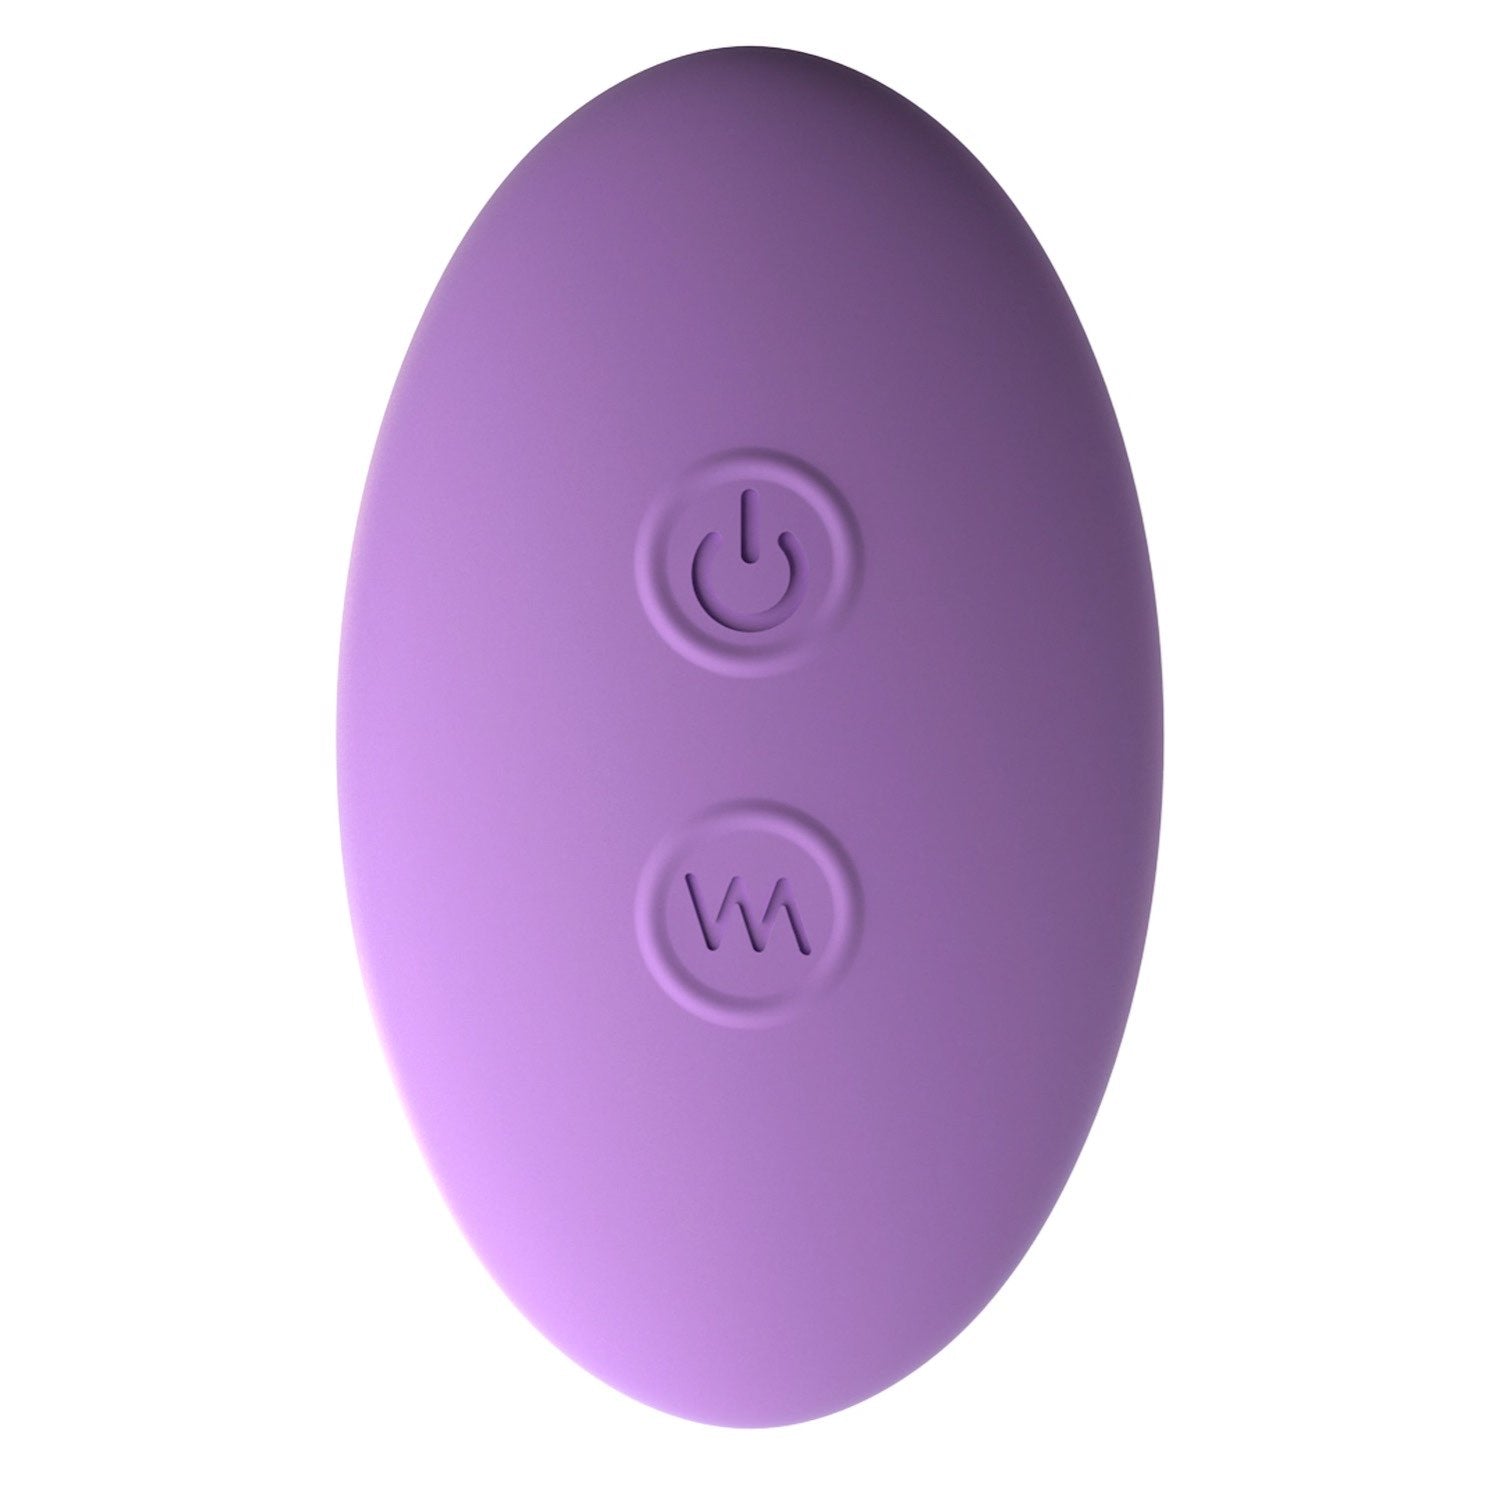 Fantasy For Her Remote Silicone Please-Her - Purple USB Rechargeable Stimulator with Wireless Remote by Pipedream